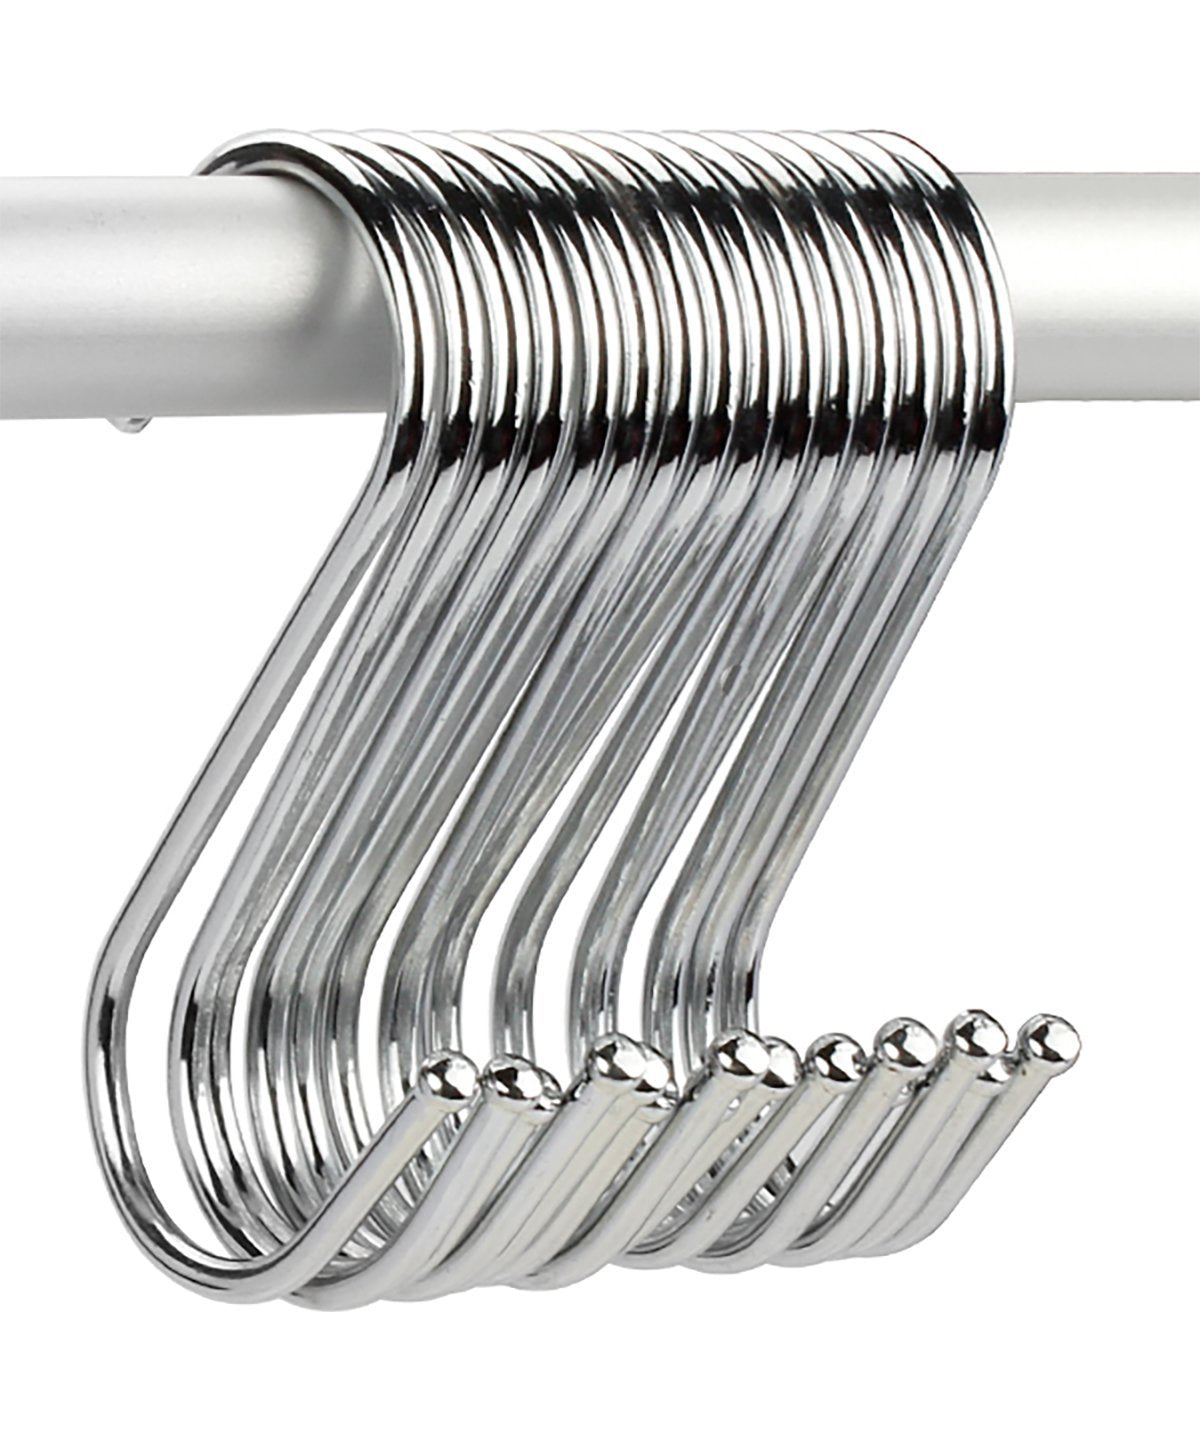 Gikbay S Hooks-Heavy-Duty Stainless Steel Hook, Gardening Tools for Plants, Silver Hanging Hooks Installation Hardware Designed for Any Kitchen (M, 20 Pcs)